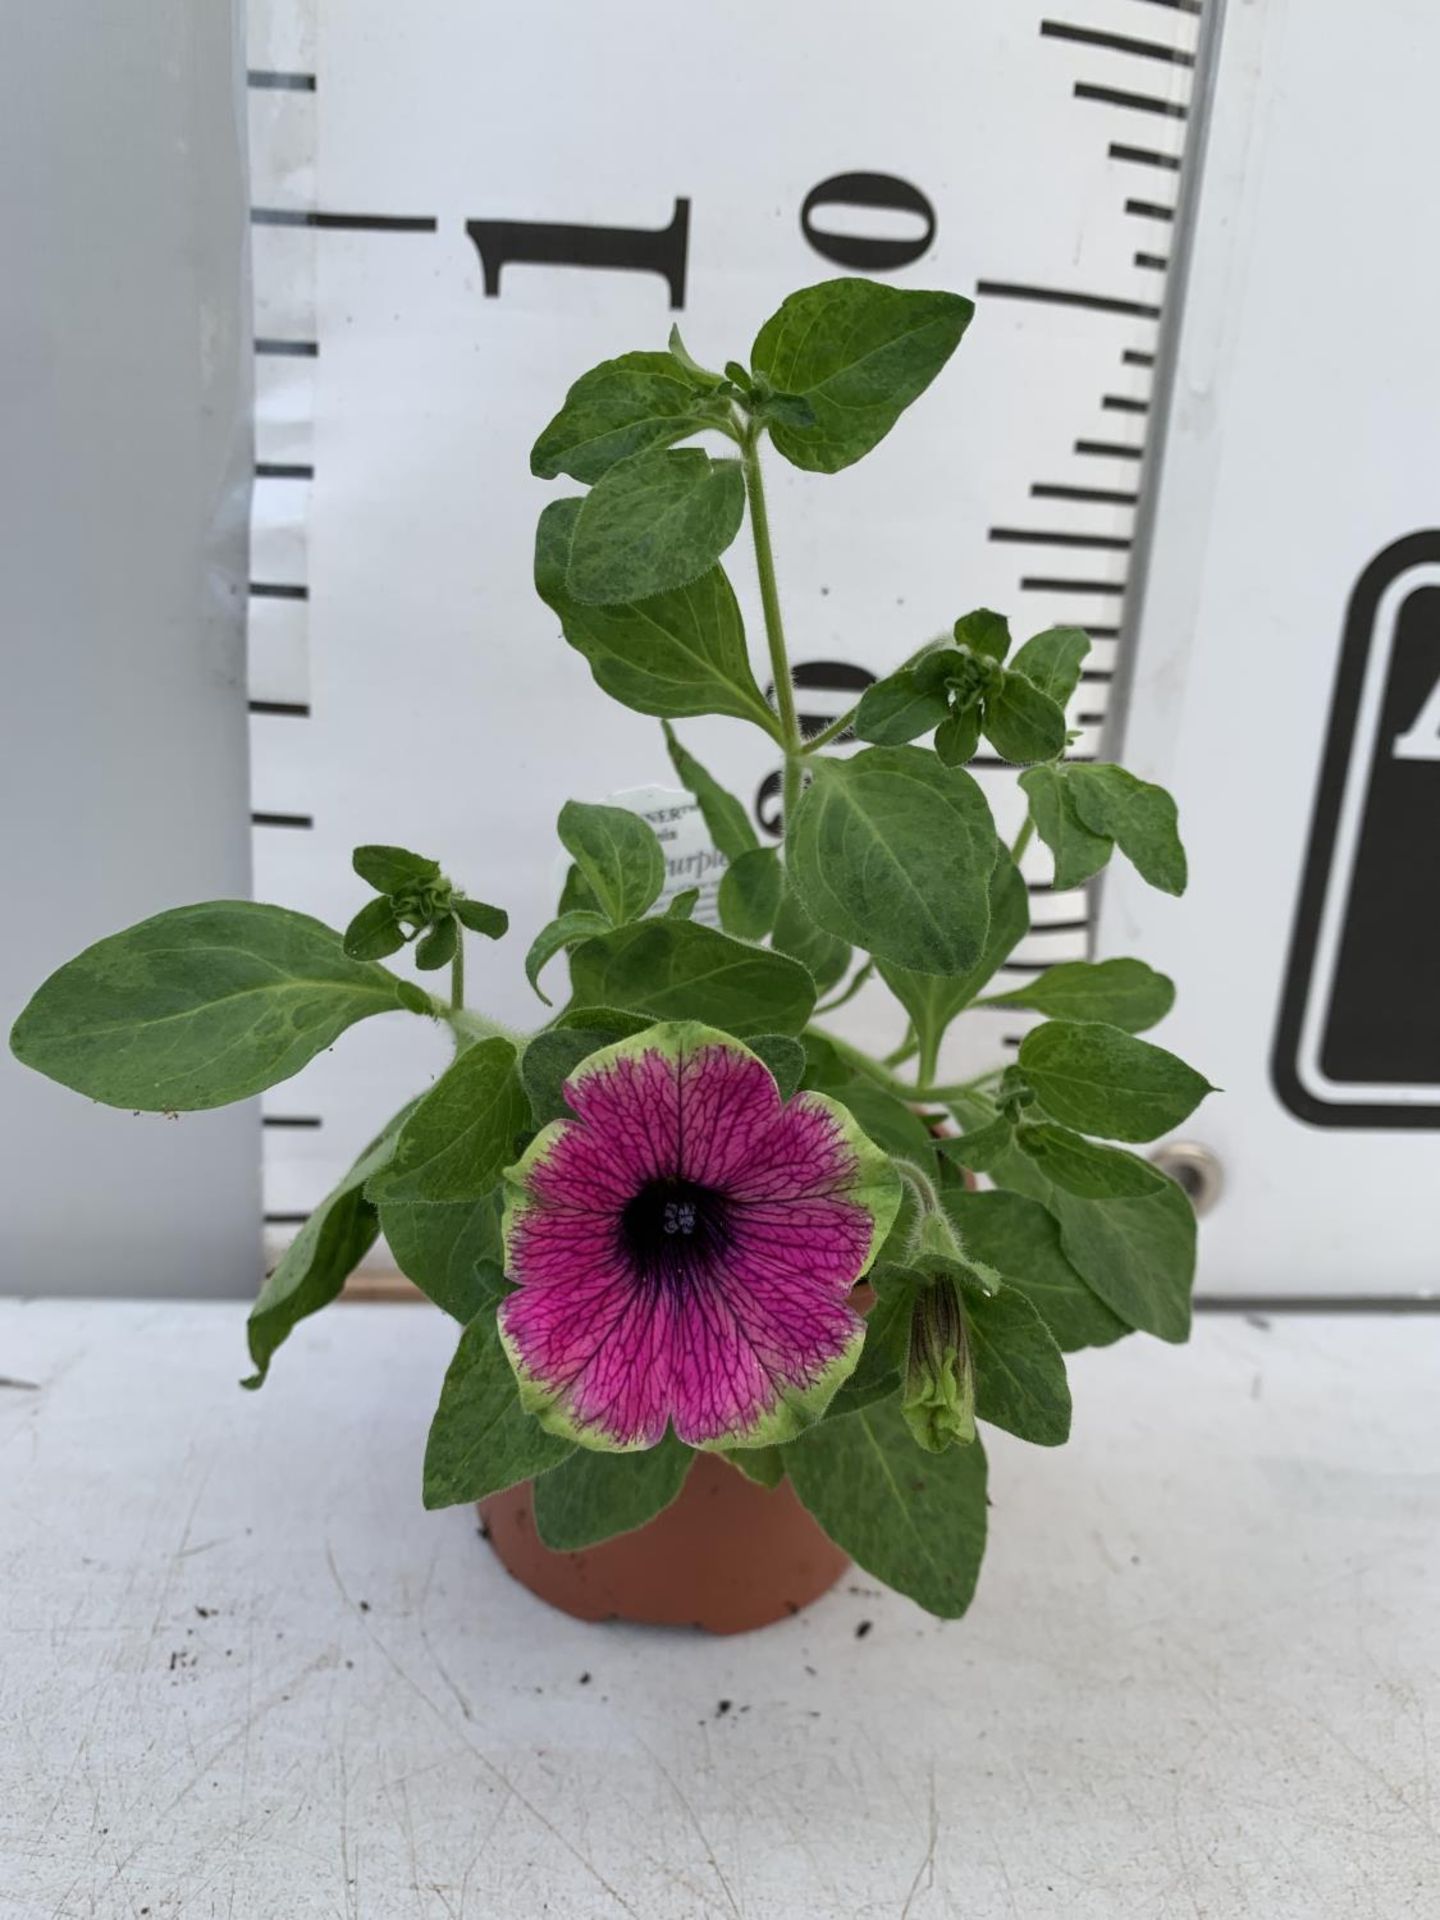 FIFTEEN PETUNIA BUZZ PURPLE BASKET PLANTS IN P9 POTS PLUS VAT TO BE SOLD FOR THE FIFTEEN - Image 5 of 6